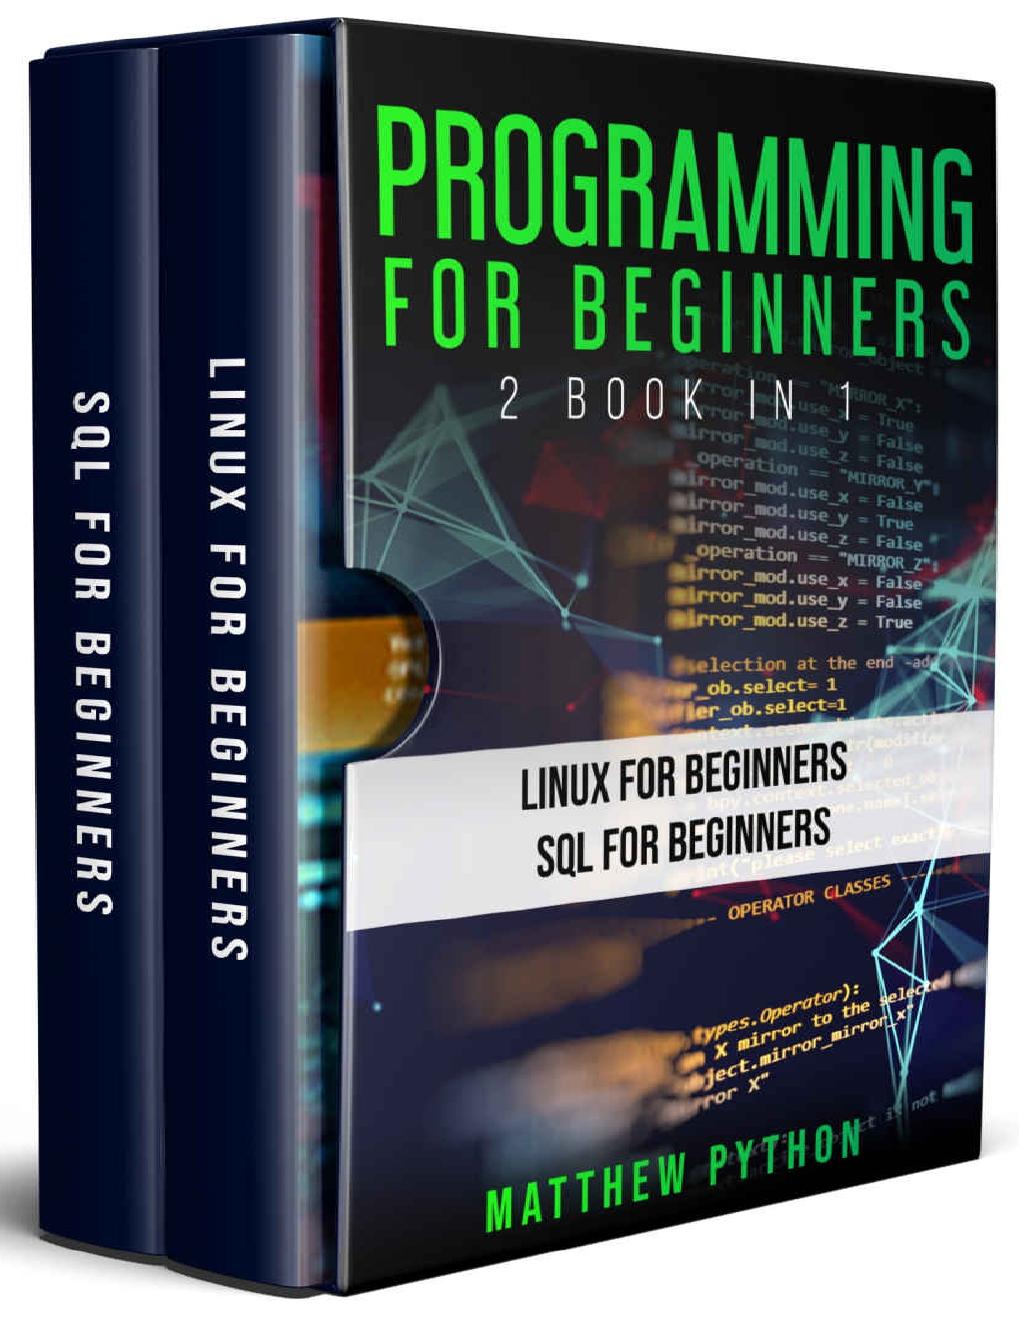 Programming for Beginners : 2 book in 1: Linux for beginners, SQL for Beginners by Matthew Python